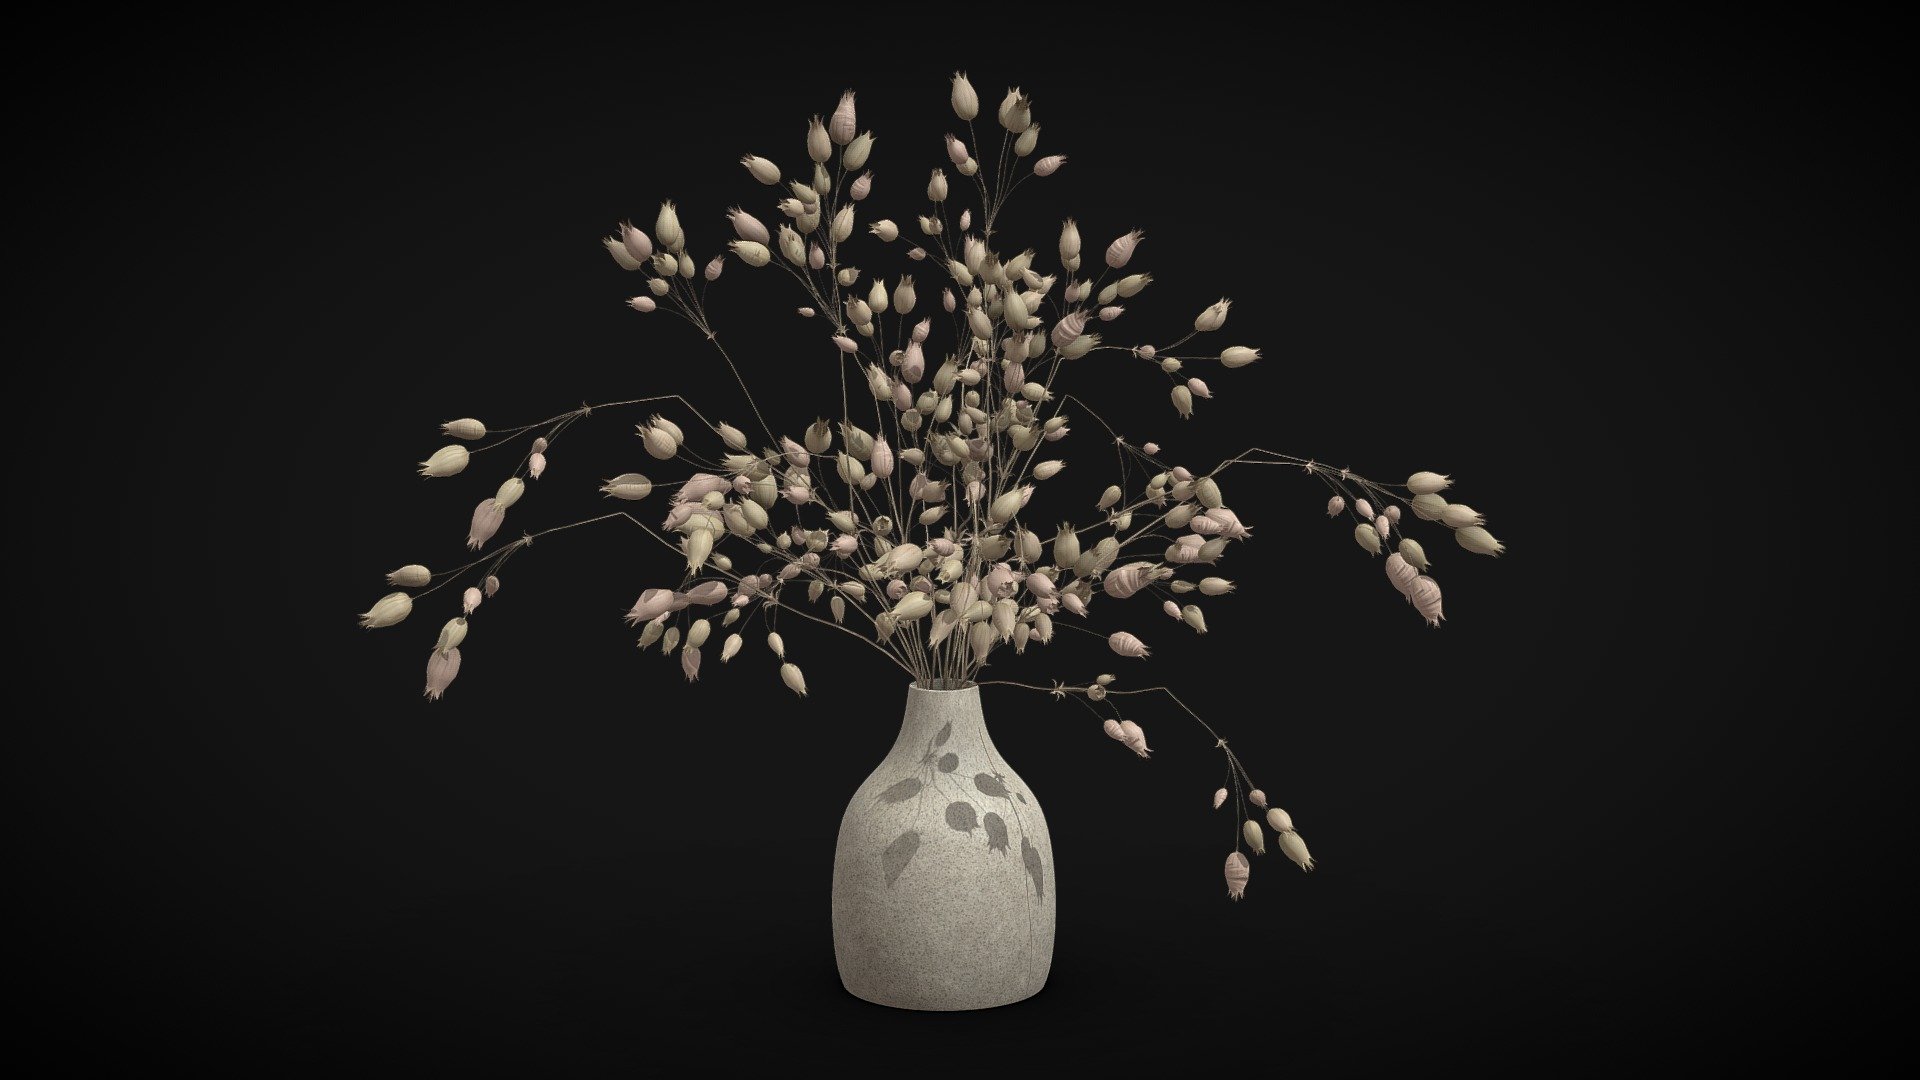 Dried grass flowers in a beige ceramic vase.

Specification:




Model is in a real scale

Height: 60cm

Polygons: 120056

Verticles: 138338

Only Quads and Triangles used

Formats:




3ds max 2017 V-Ray (native)

3ds max 2017 Arnold

Cinema R20

Cinema R20 V-Ray

Blender Cycles

Unity 2020

Unreal Engine 5.1

FBX

OBJ

DWG
 - Dried Grass Flowers I - Buy Royalty Free 3D model by Fusemesh 3d model